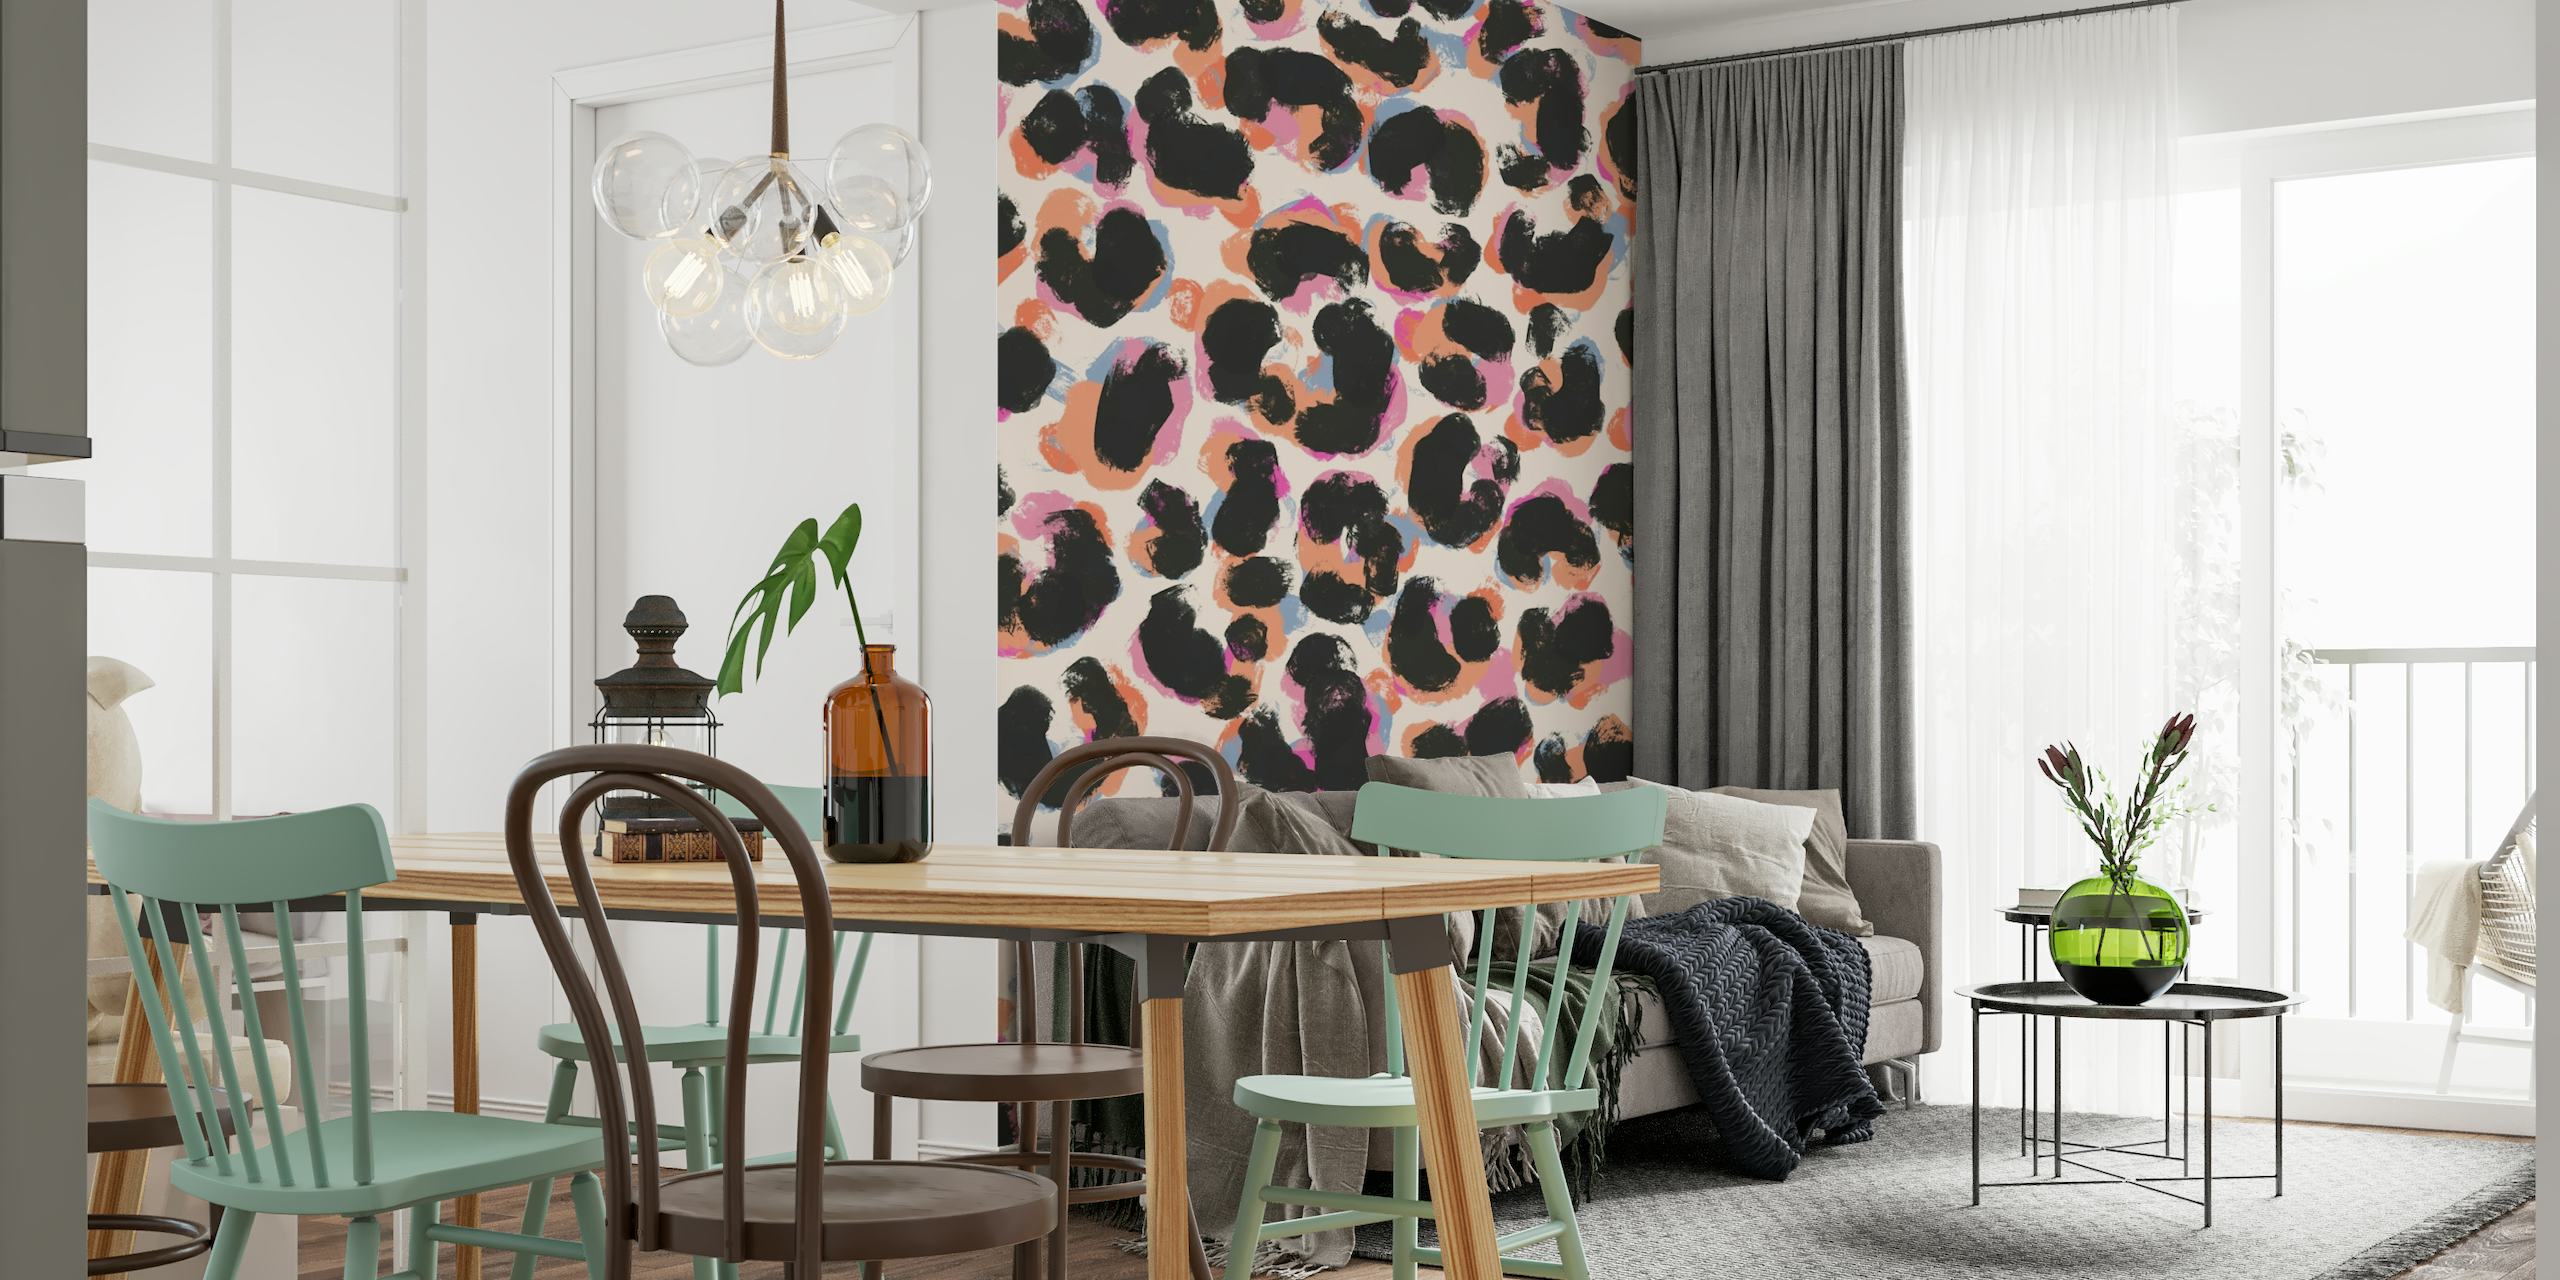 Abstract leopard print wall mural with black, white, and peach-pink patterns